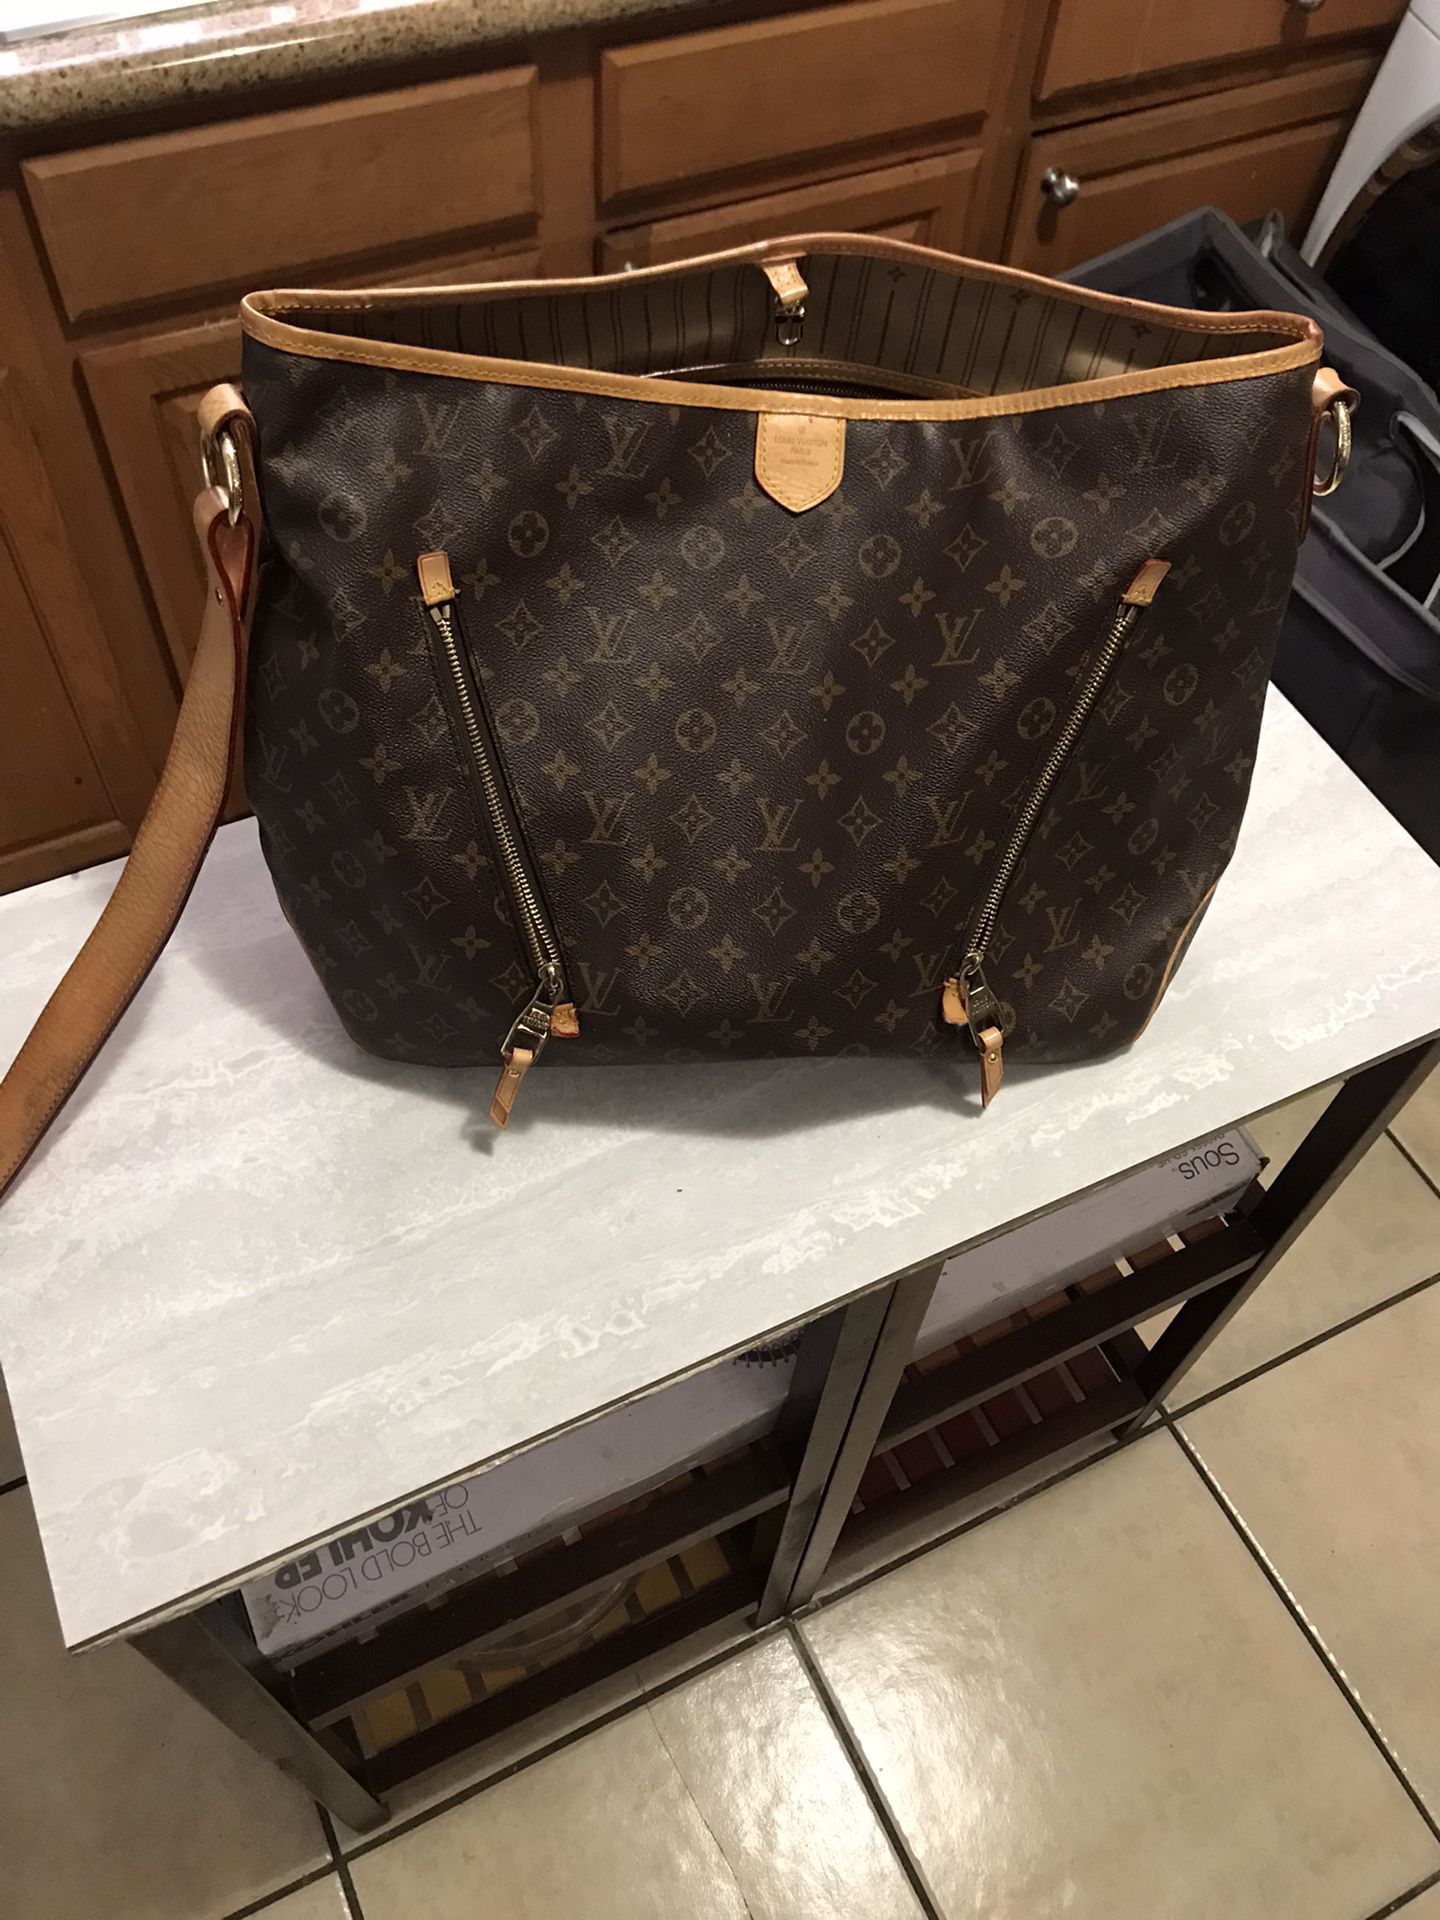 gently used louis vuitton bags